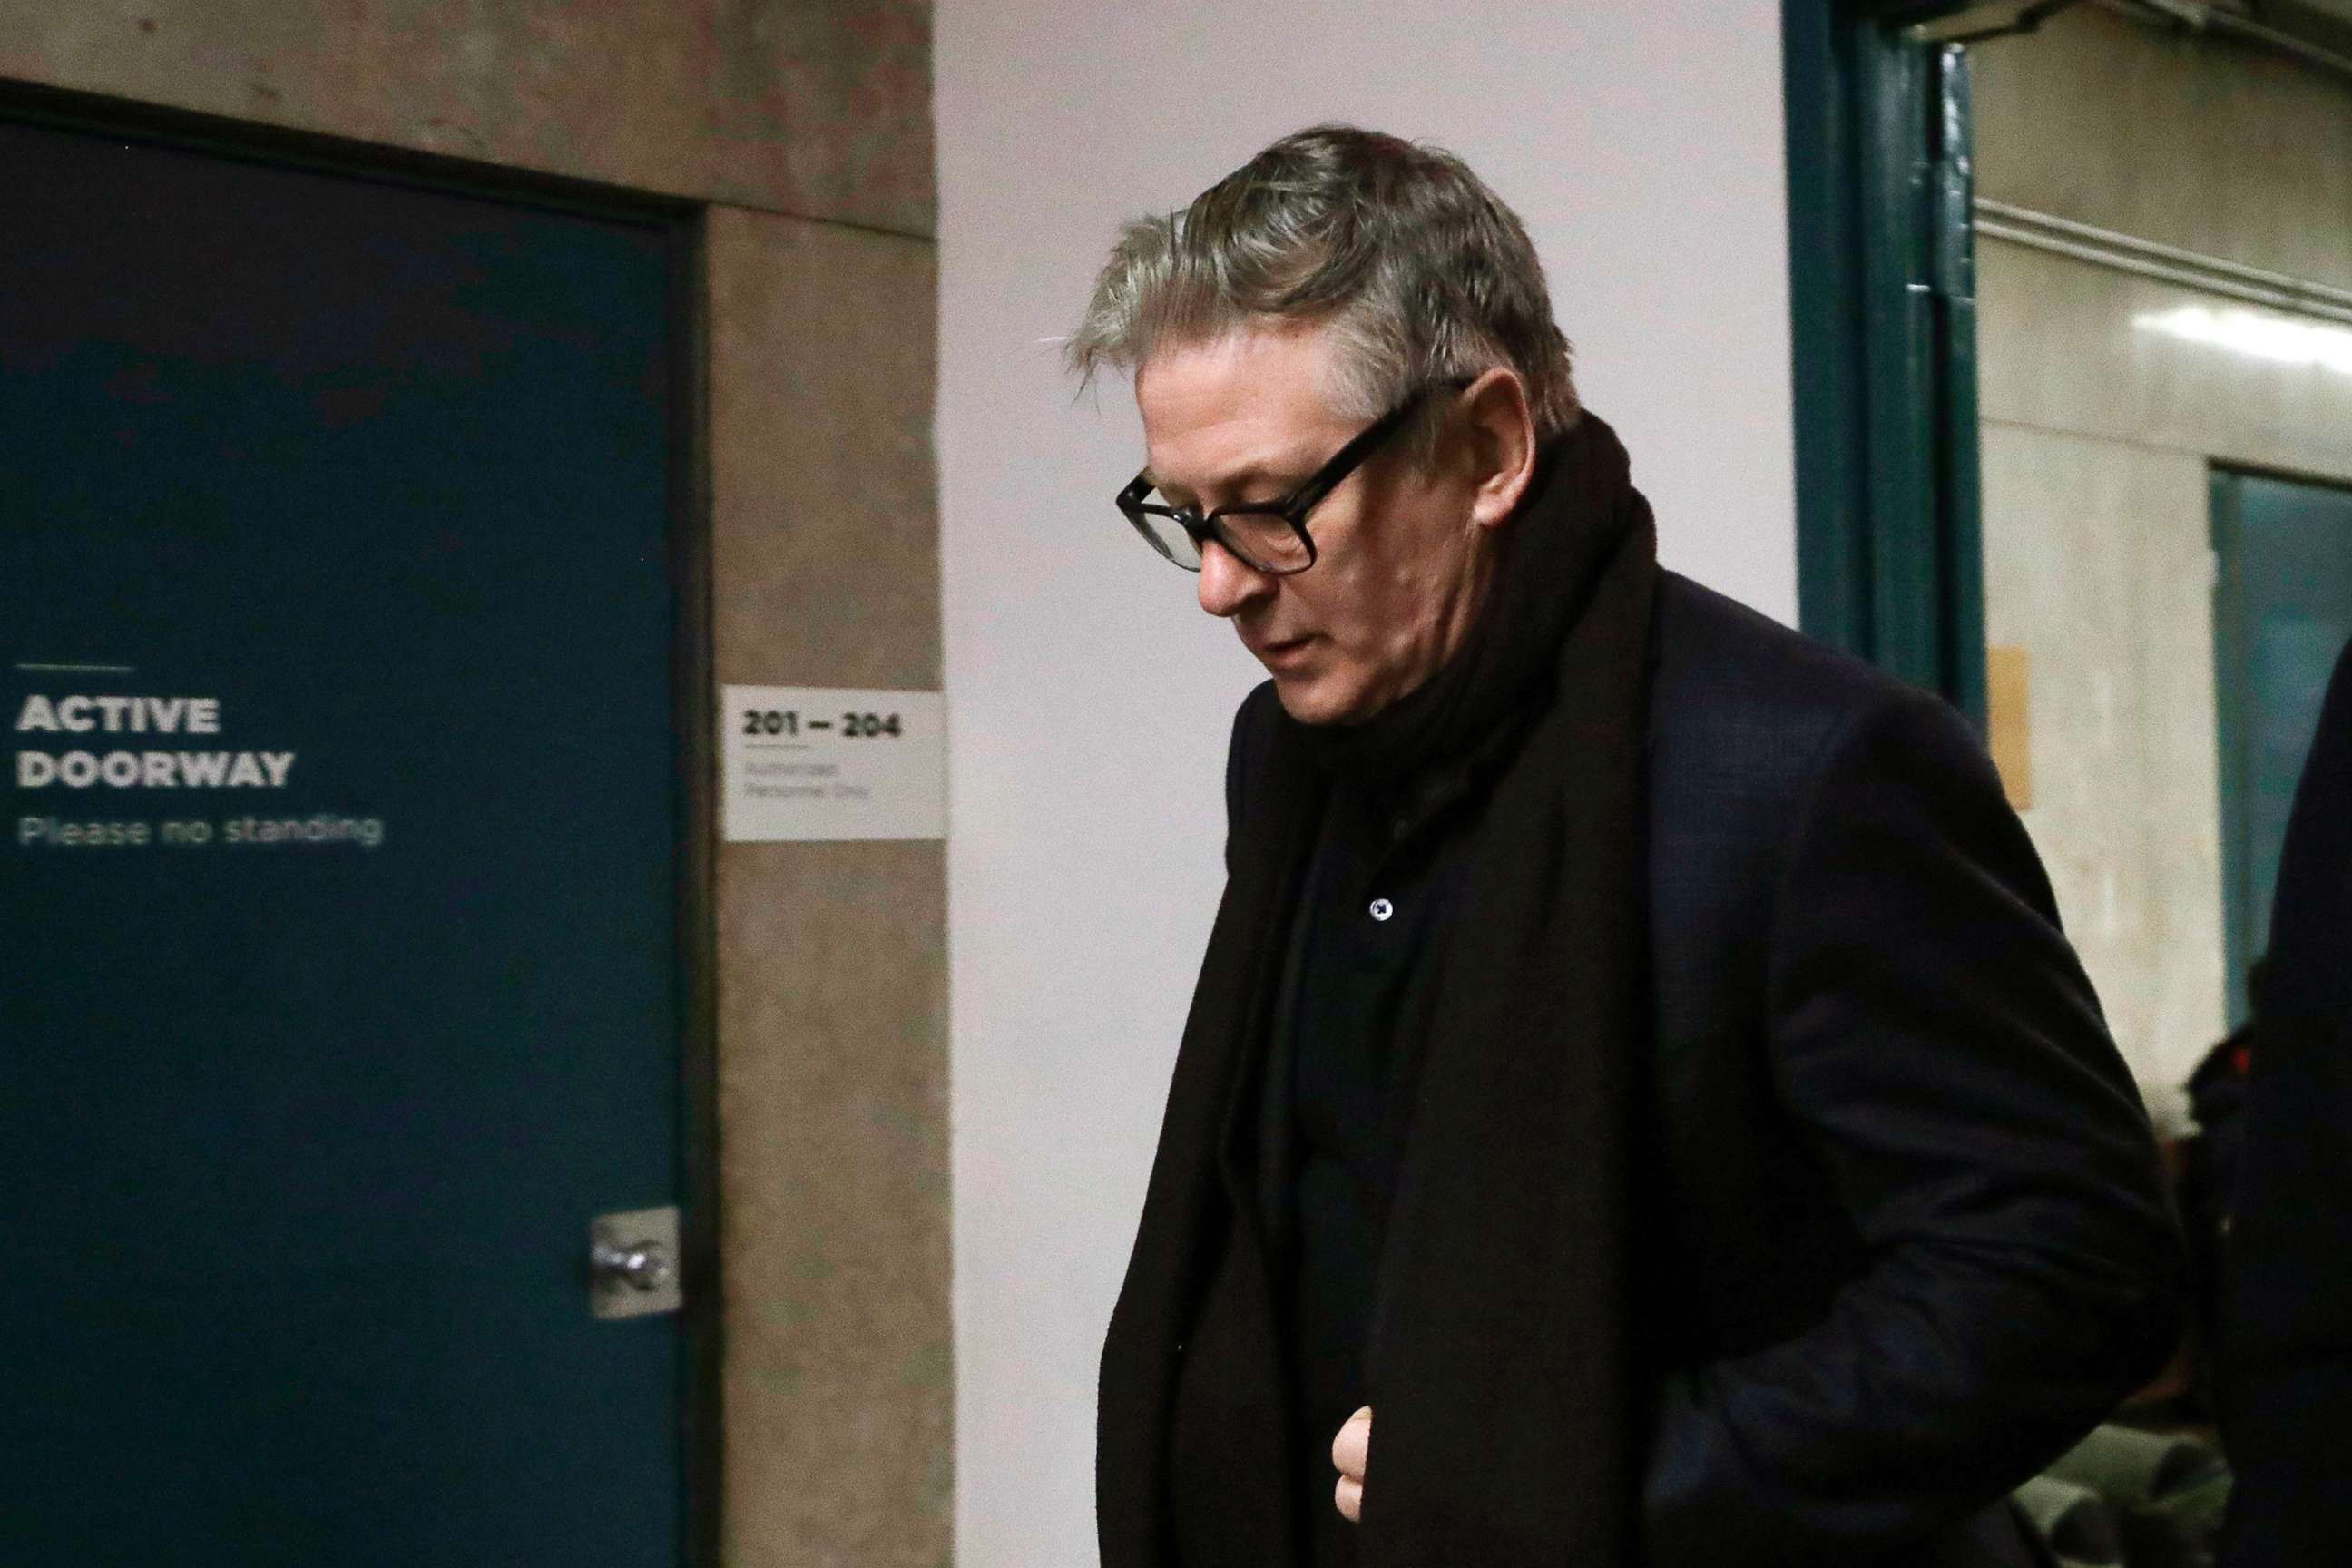 PHOTO: Actor Alec Baldwin arrives in a New York court, Jan. 23, 2019, for a hearing on charges that he slugged a man during a dispute over a parking spot last fall.